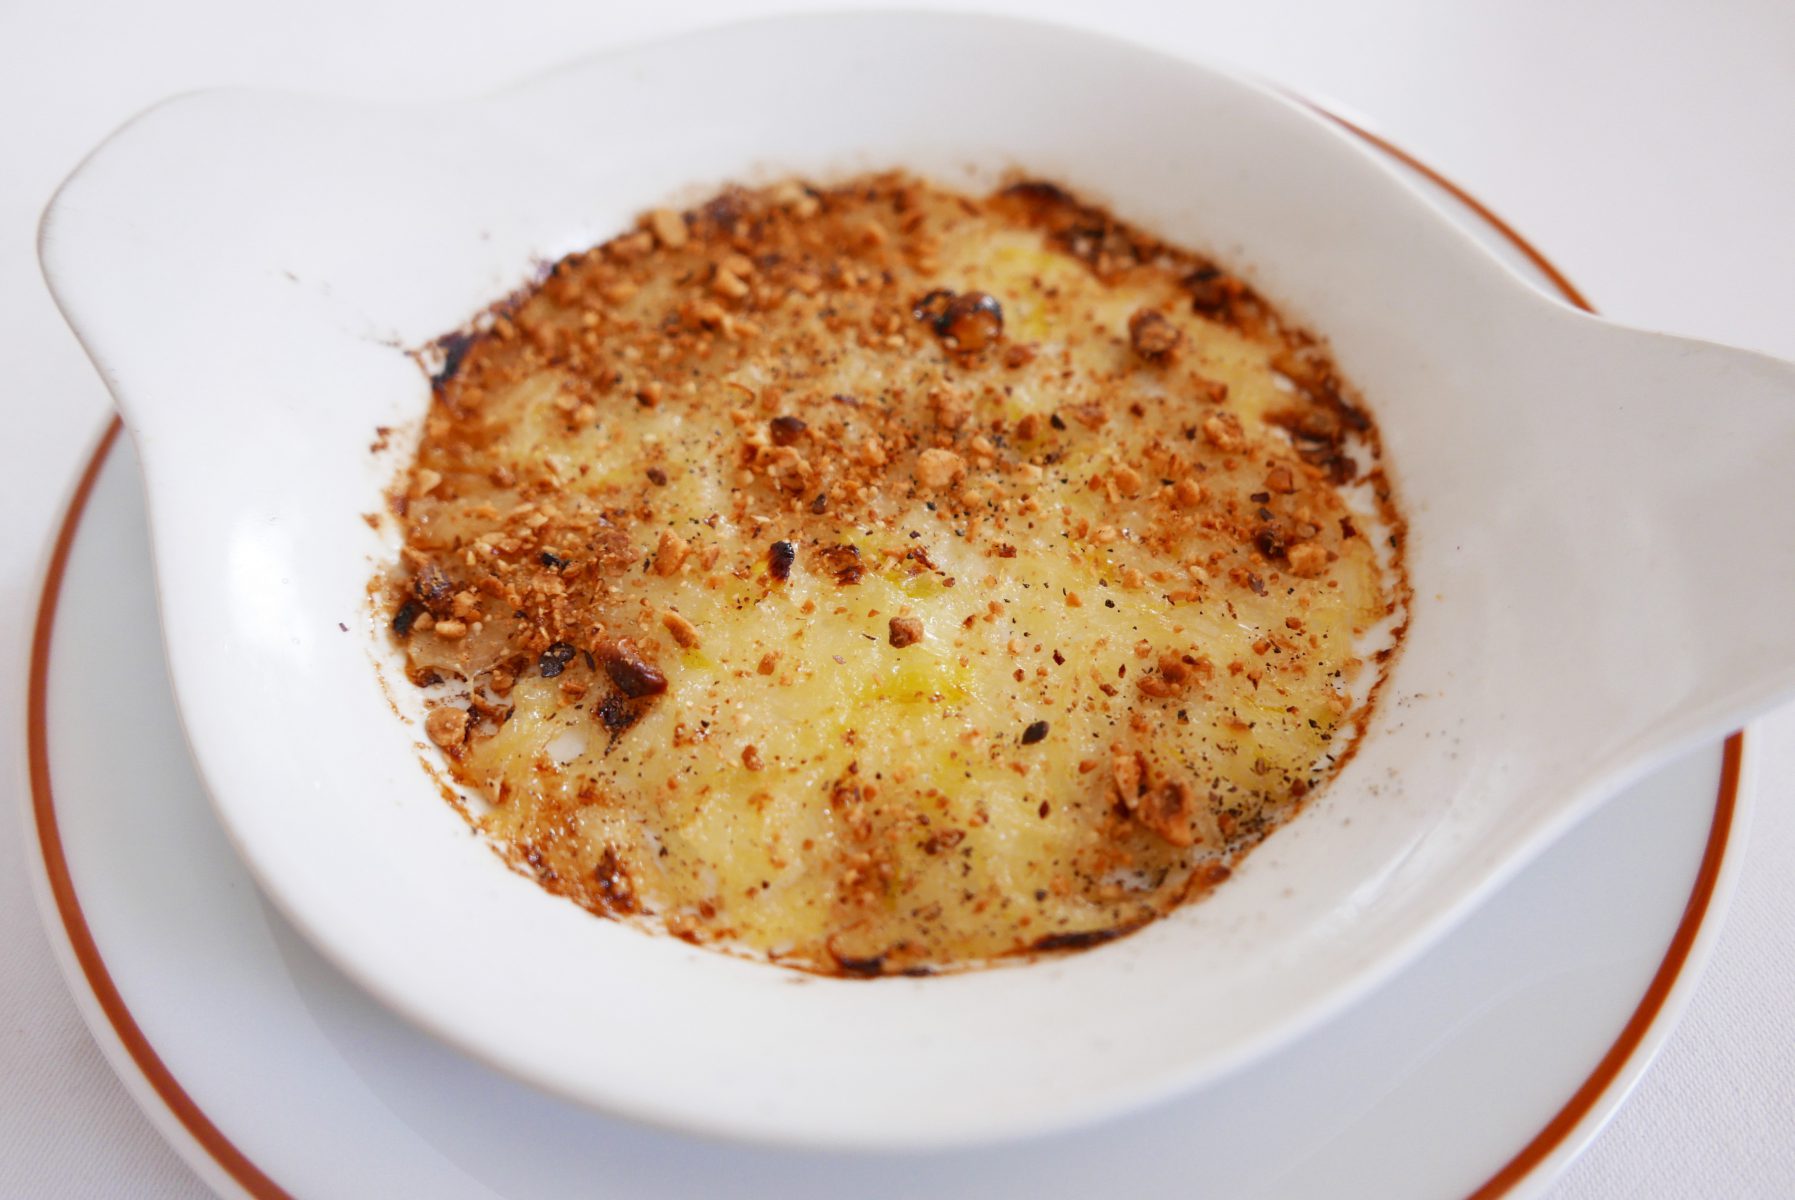 Gratinated onions with hazelnuts